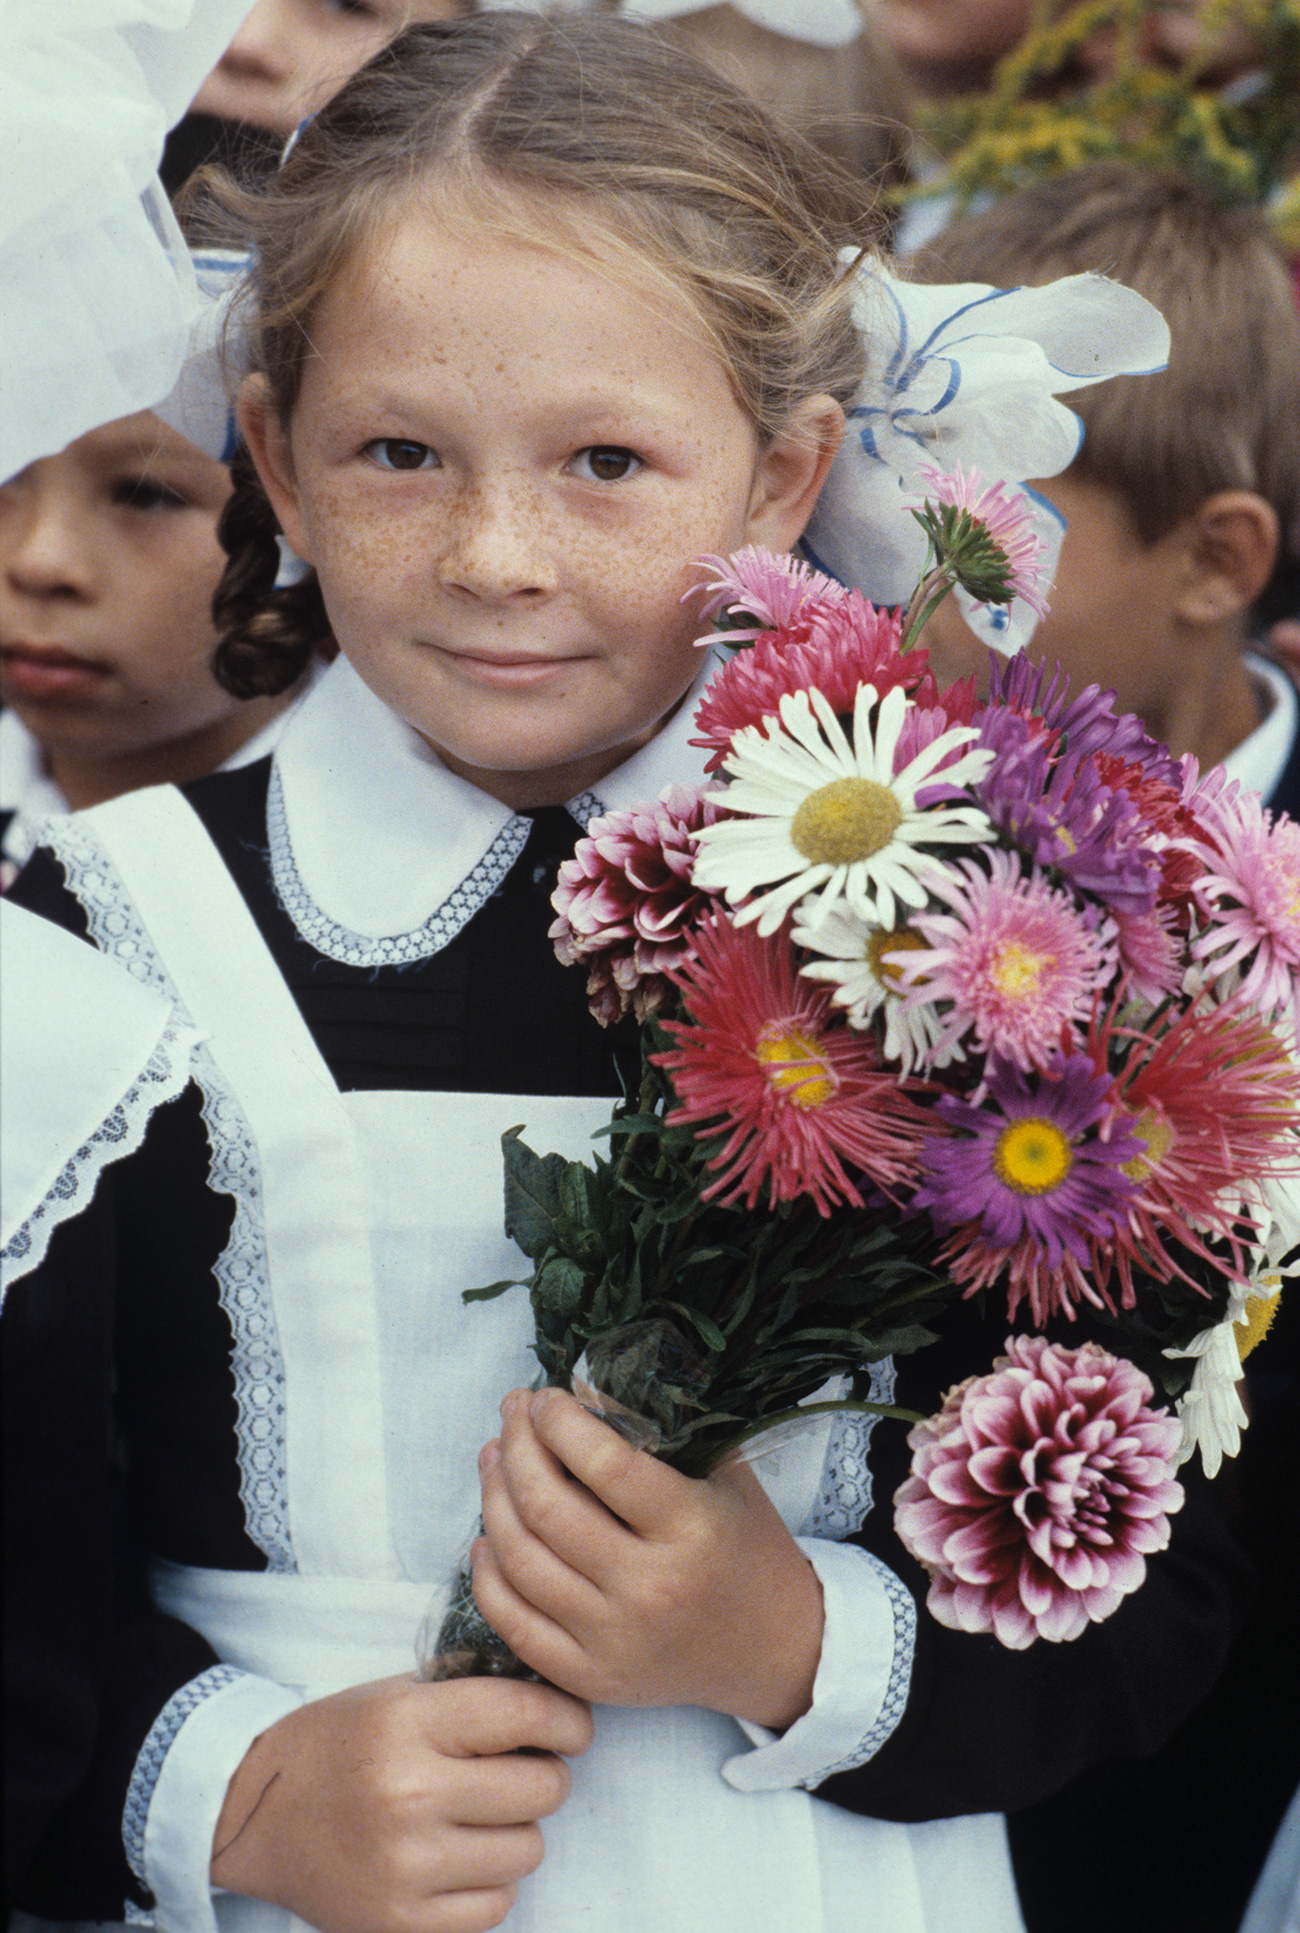 The school uniform was abolished in 1994, after the collapse of the USSR, as a relic of the Soviet past. However, in 2013 it was reintroduced as mandatory. But today the style, color and form vary greatly, and are regulated by each school independently.